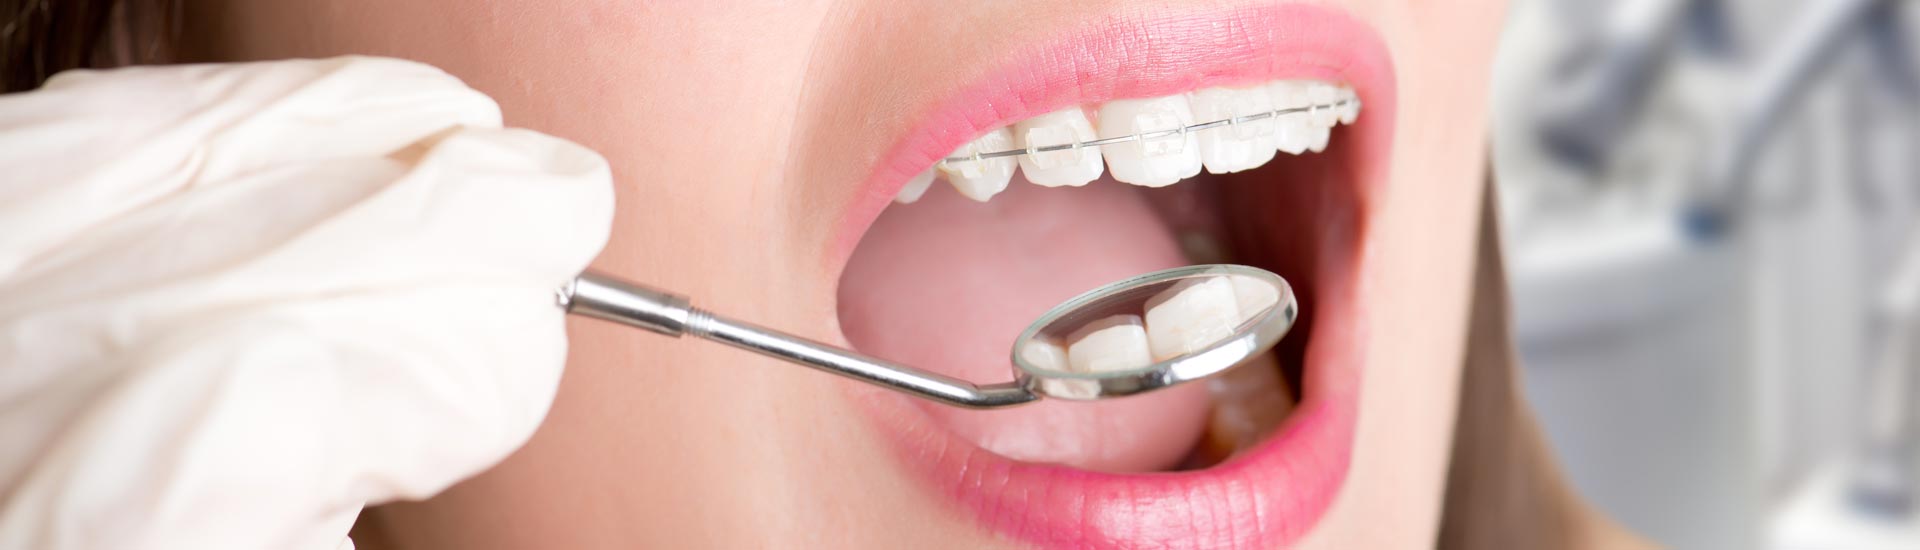 Orthodontics | Our expertise